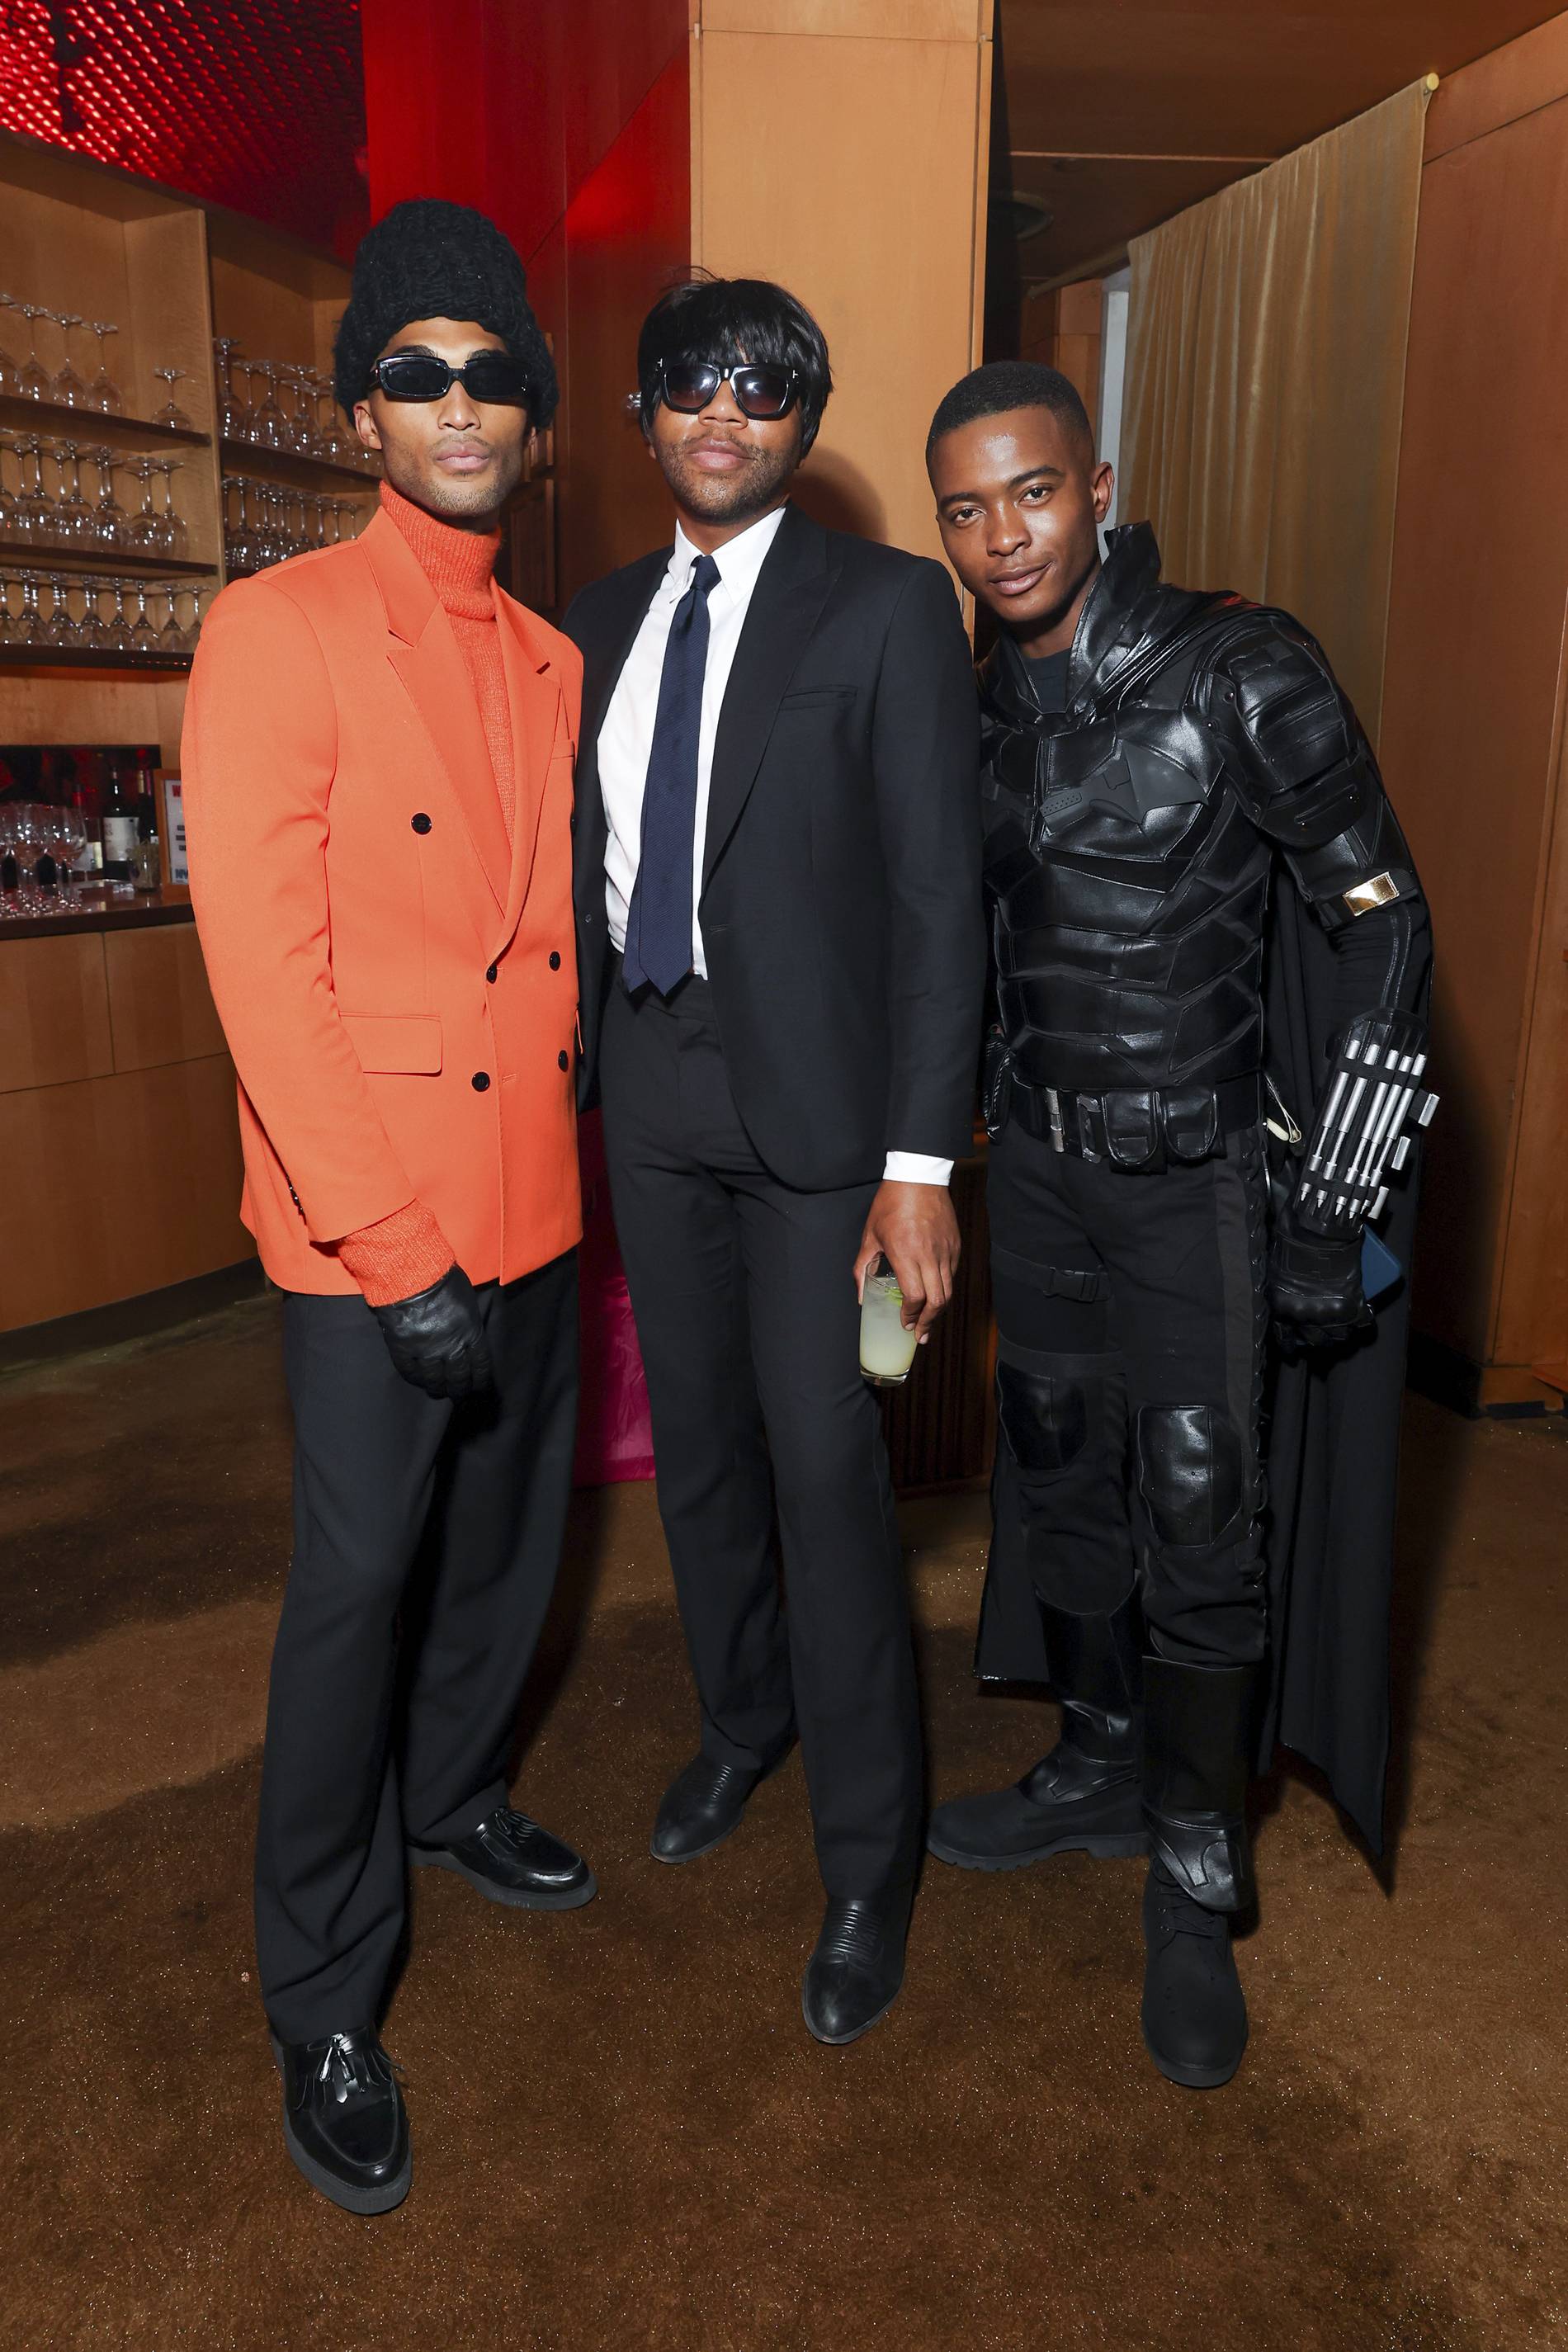 Jovel Royston, Brandon Murphy and Igee Okafor in costume at the standard halloween party 2022